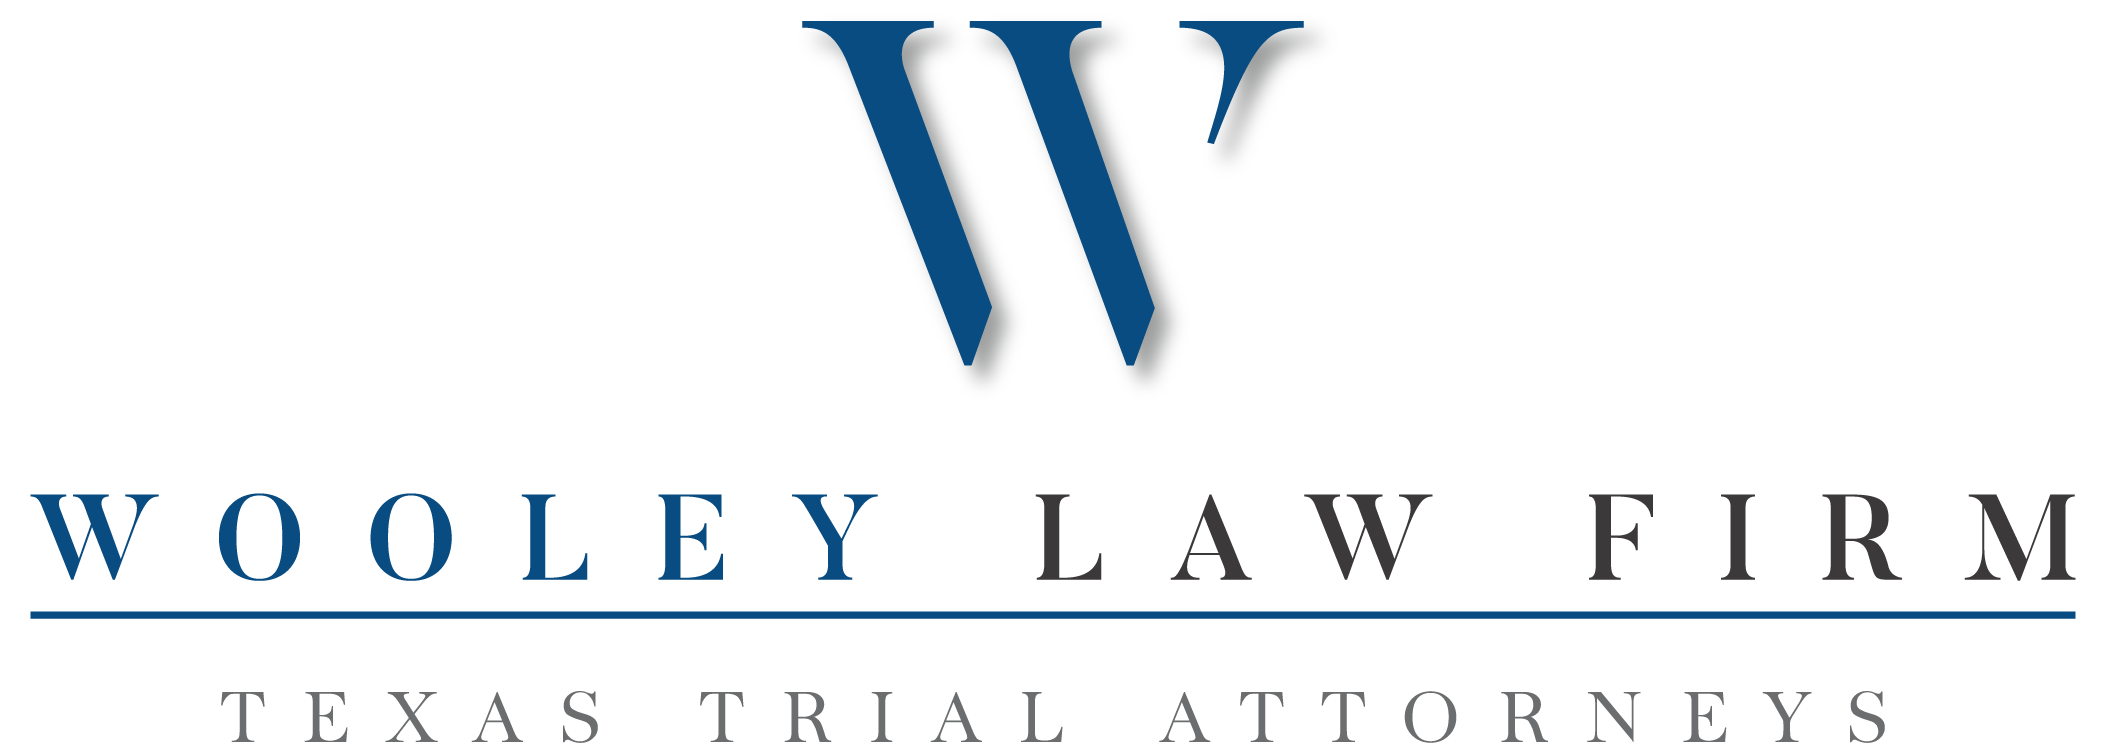 Wooley Law Firm